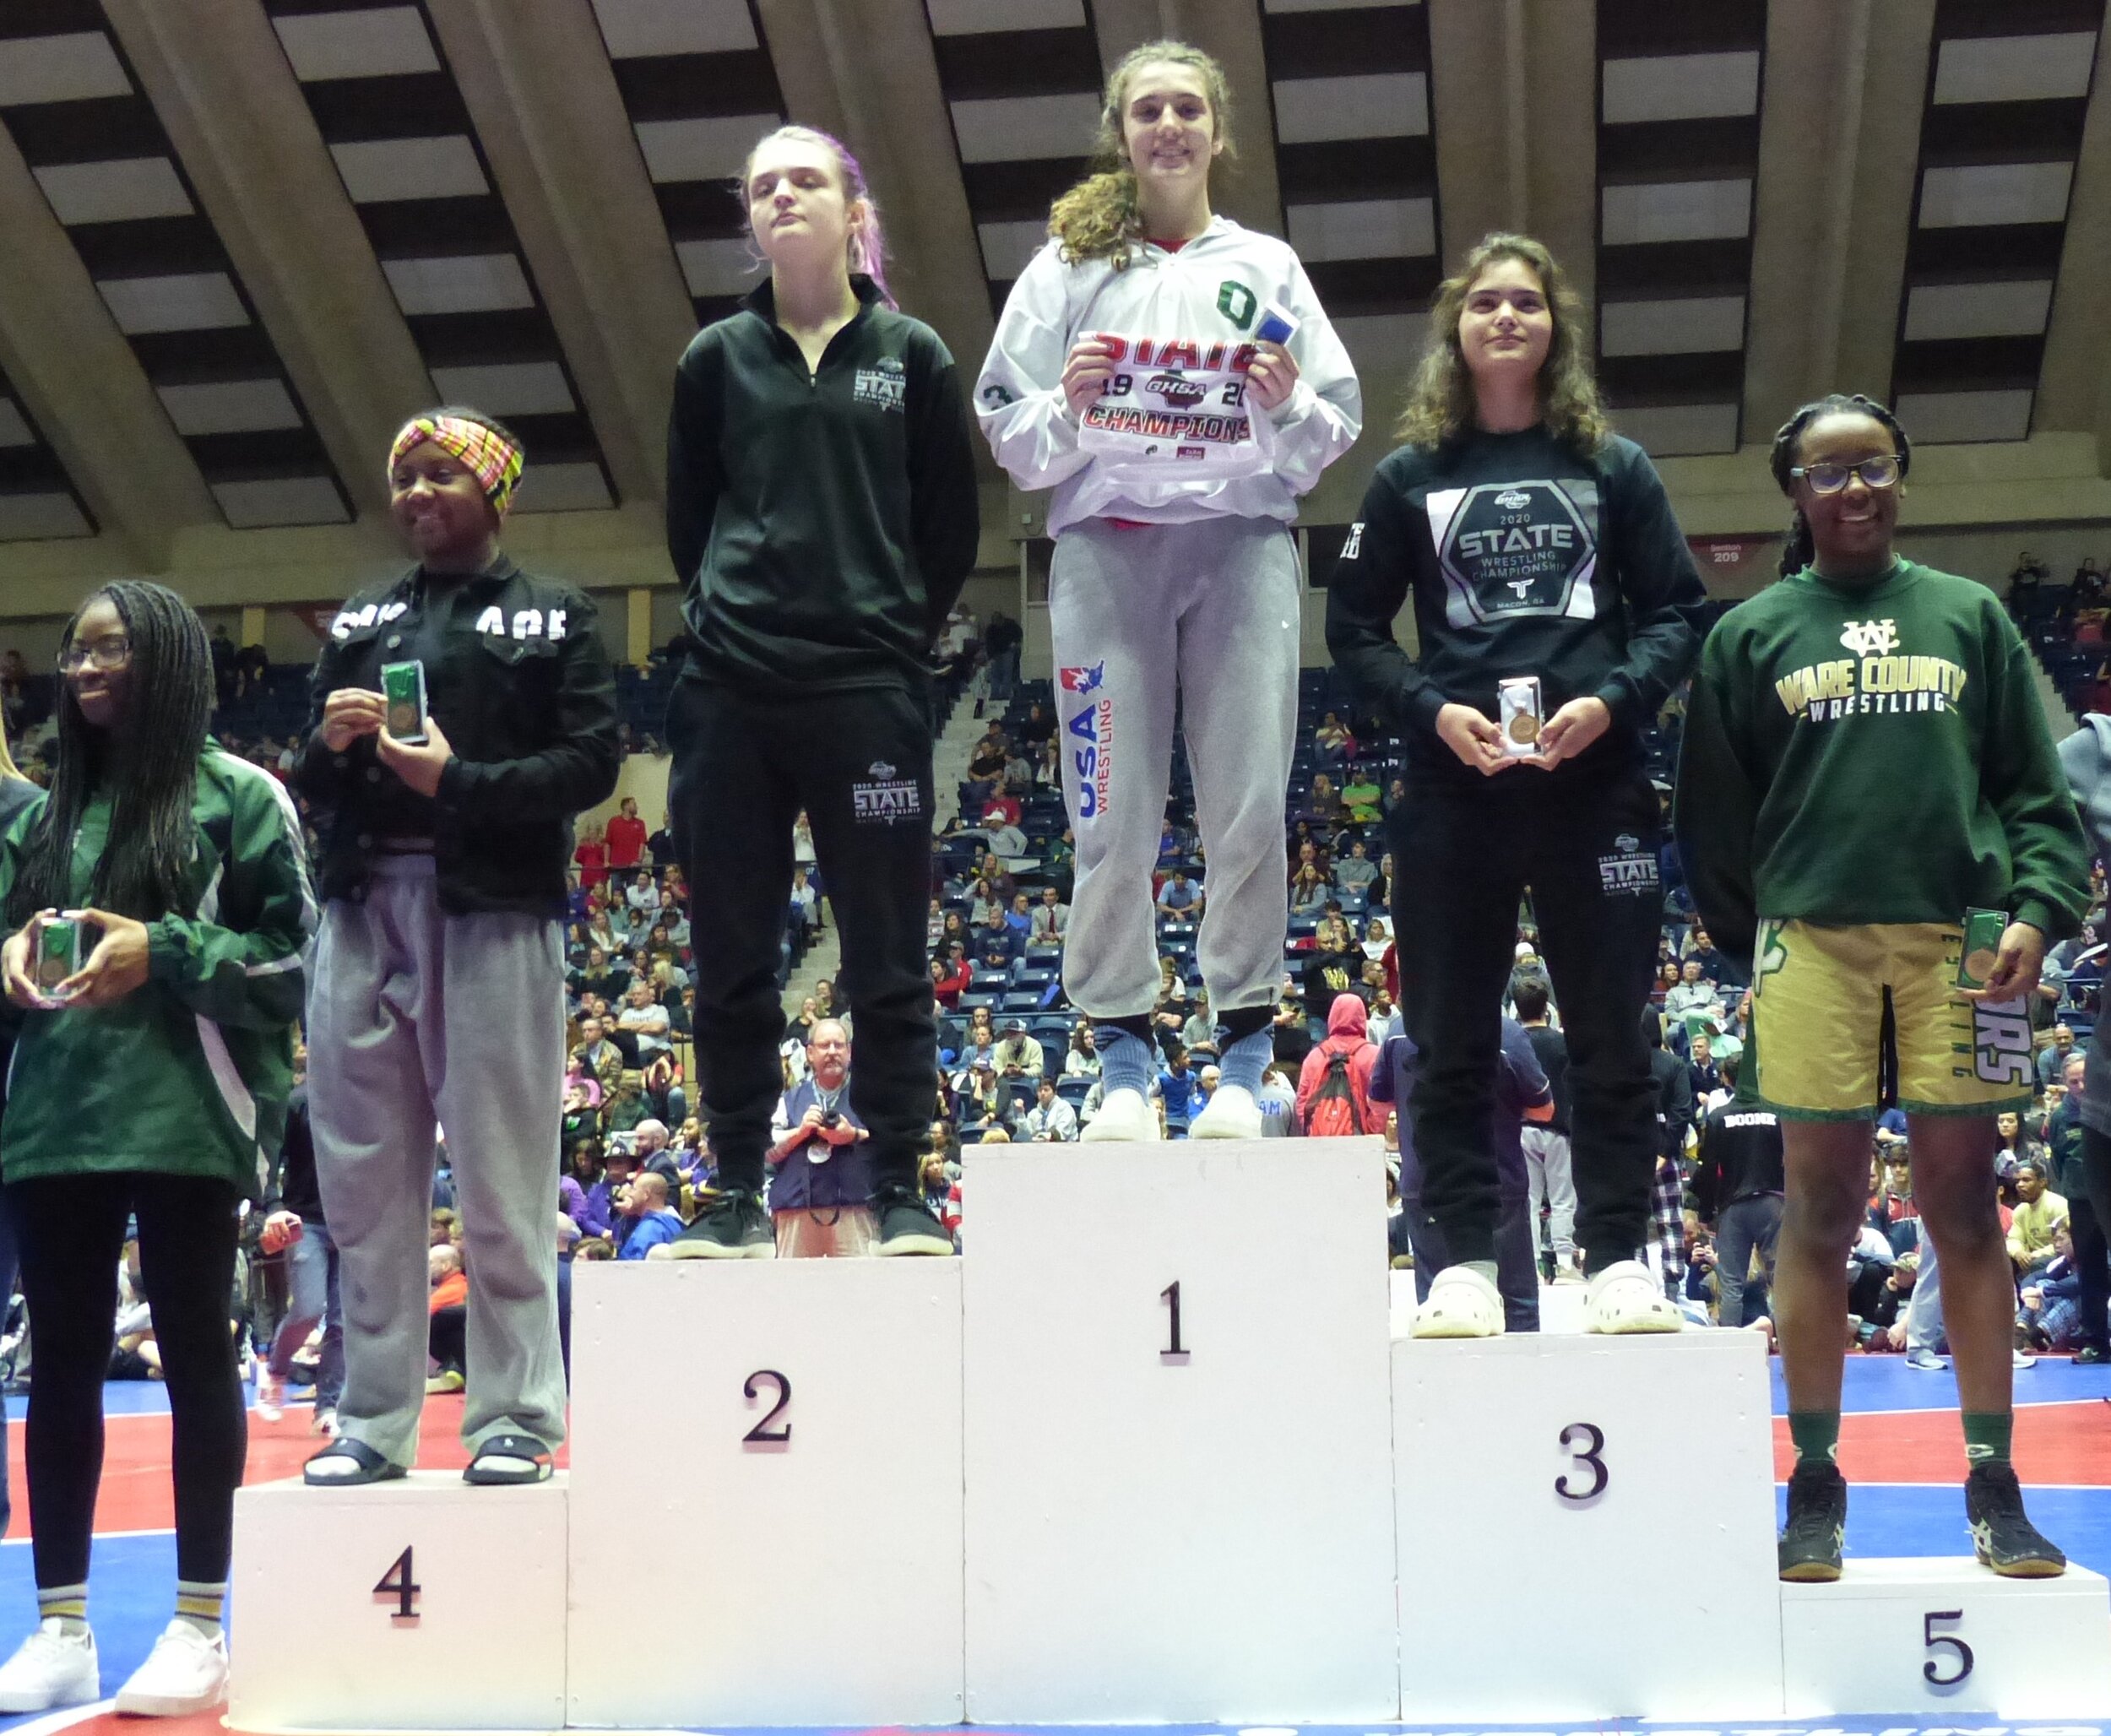 Kendra Moore 122 5th place